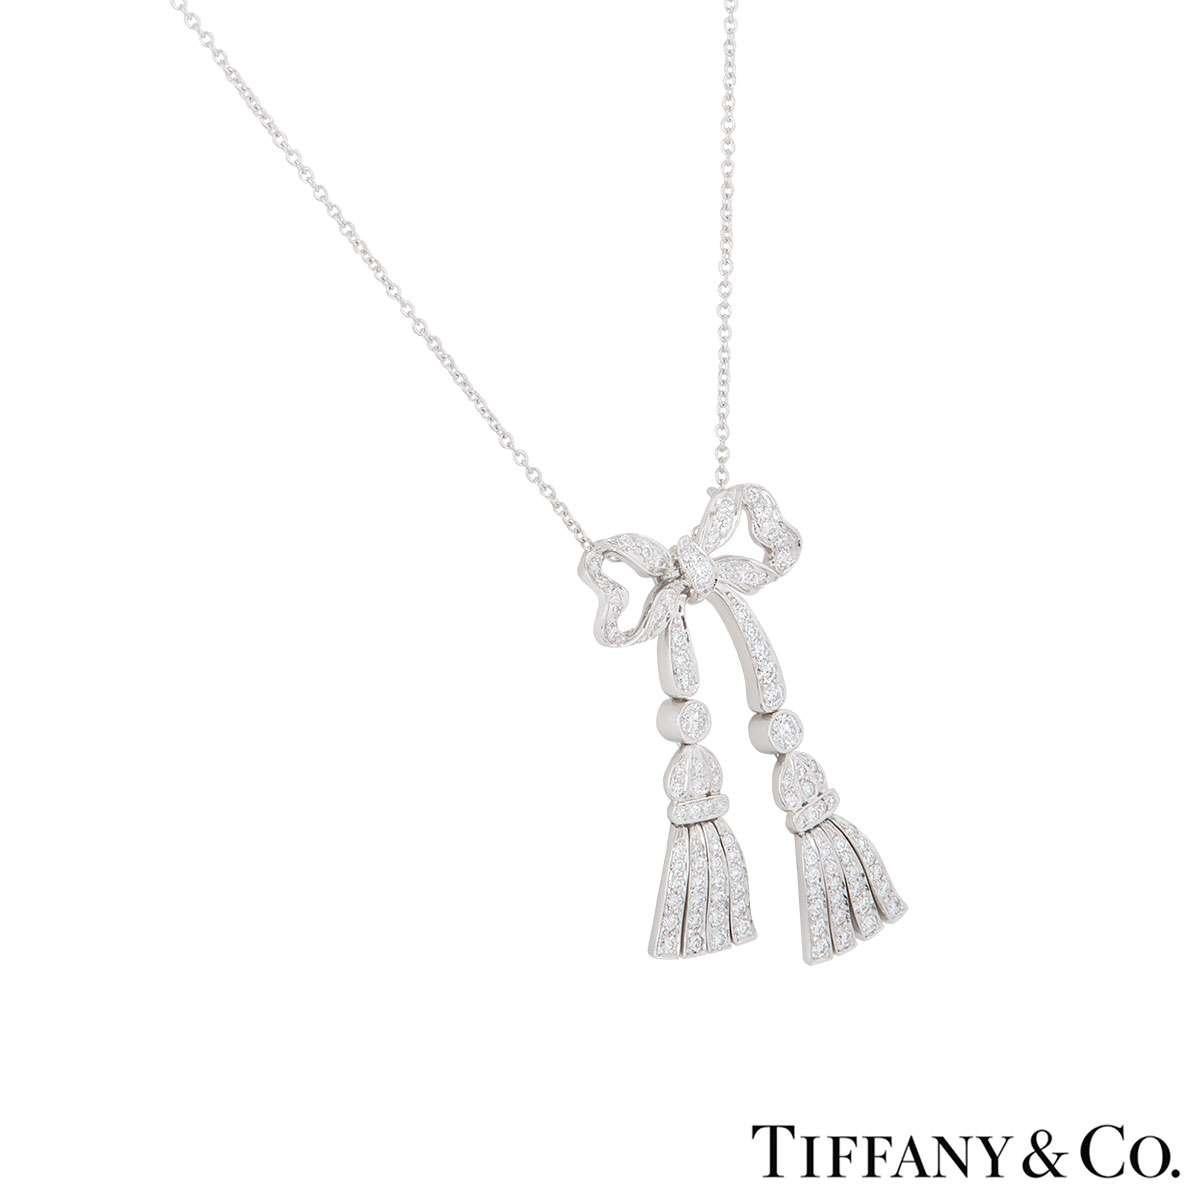 A striking diamond bow necklace in platinum by Tiffany & Co. The central bow motif suspends two articulated tassel pendants, each connected to a single rubover set diamond. The bow is pave set with round brilliant cut diamonds totaling approximately